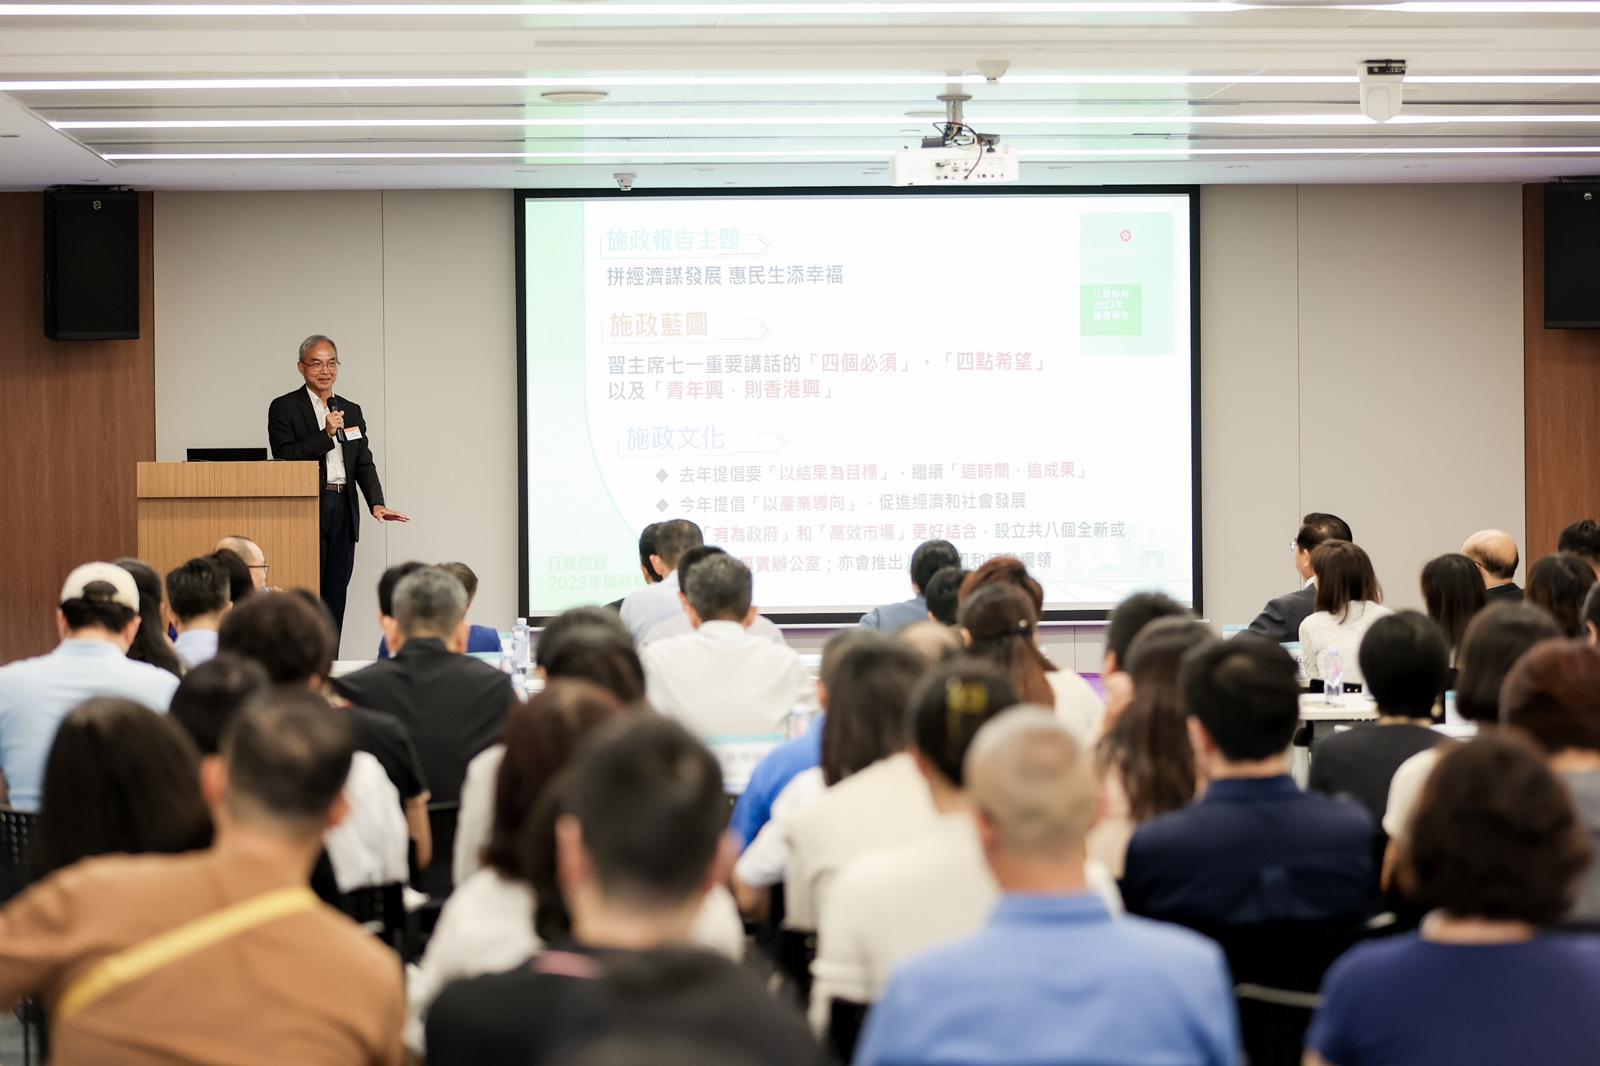  Mr Nicholas Kwan, Deputy Head of the CEPU, attended a seminar titled “A Vibrant Economy and New Opportunities for Hong Kong” to introduce the Policy Address to over 100 Hong Kong businessmen and representatives of GBA enterprises.